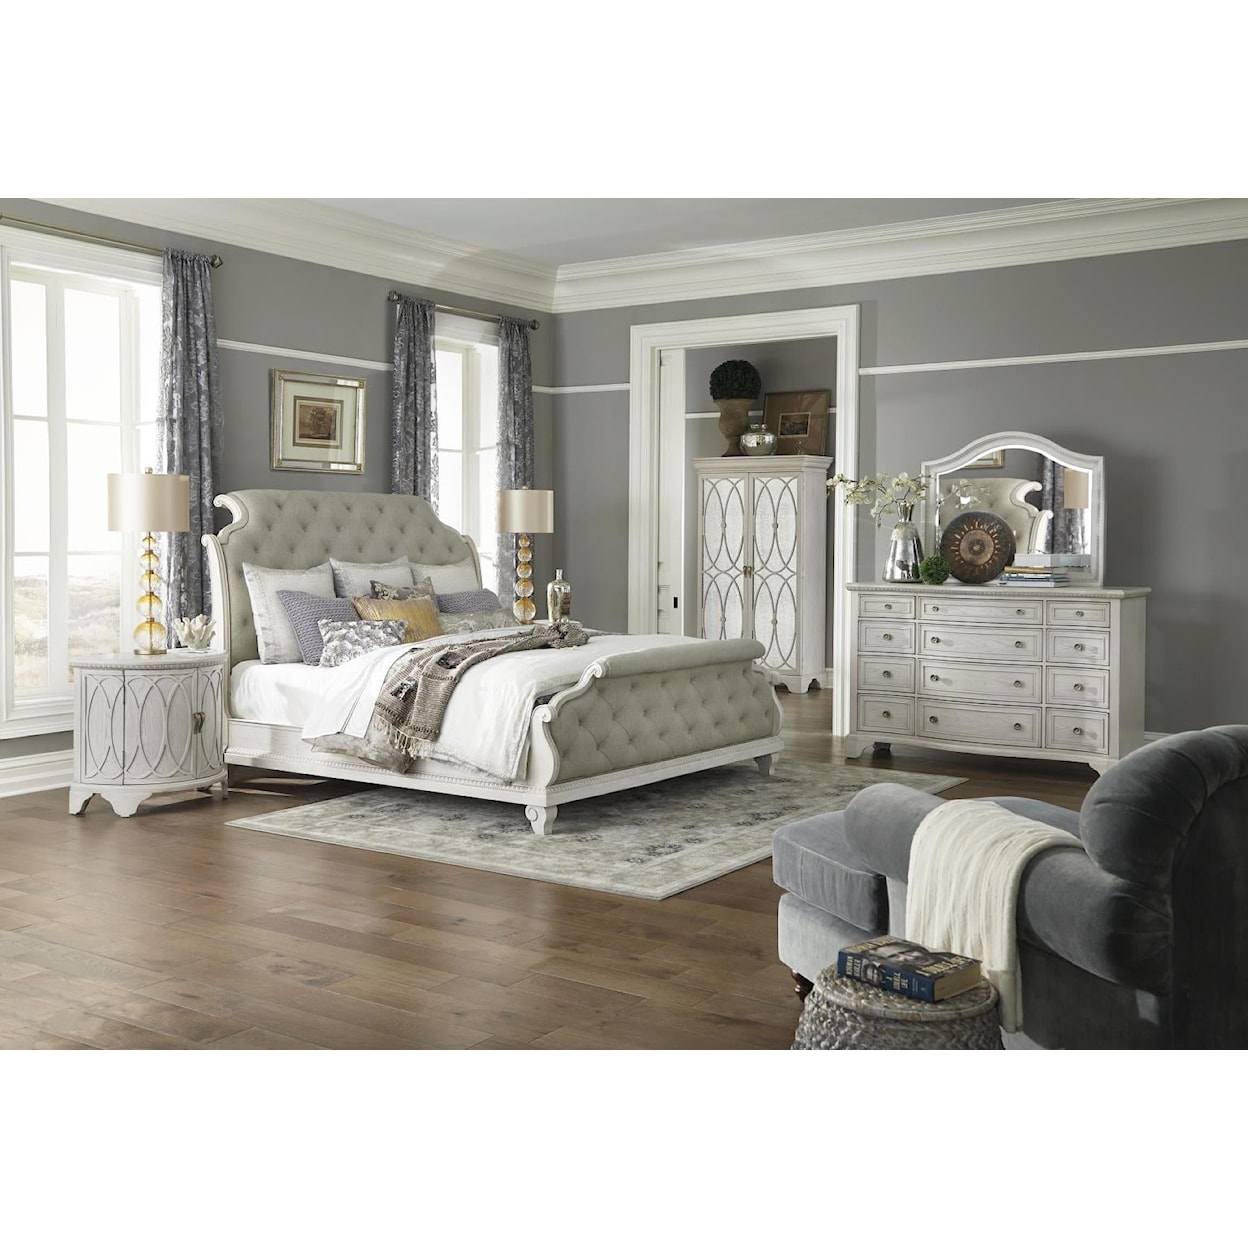 Trisha Yearwood Home Collection by Legacy Classic Jasper County King Bed